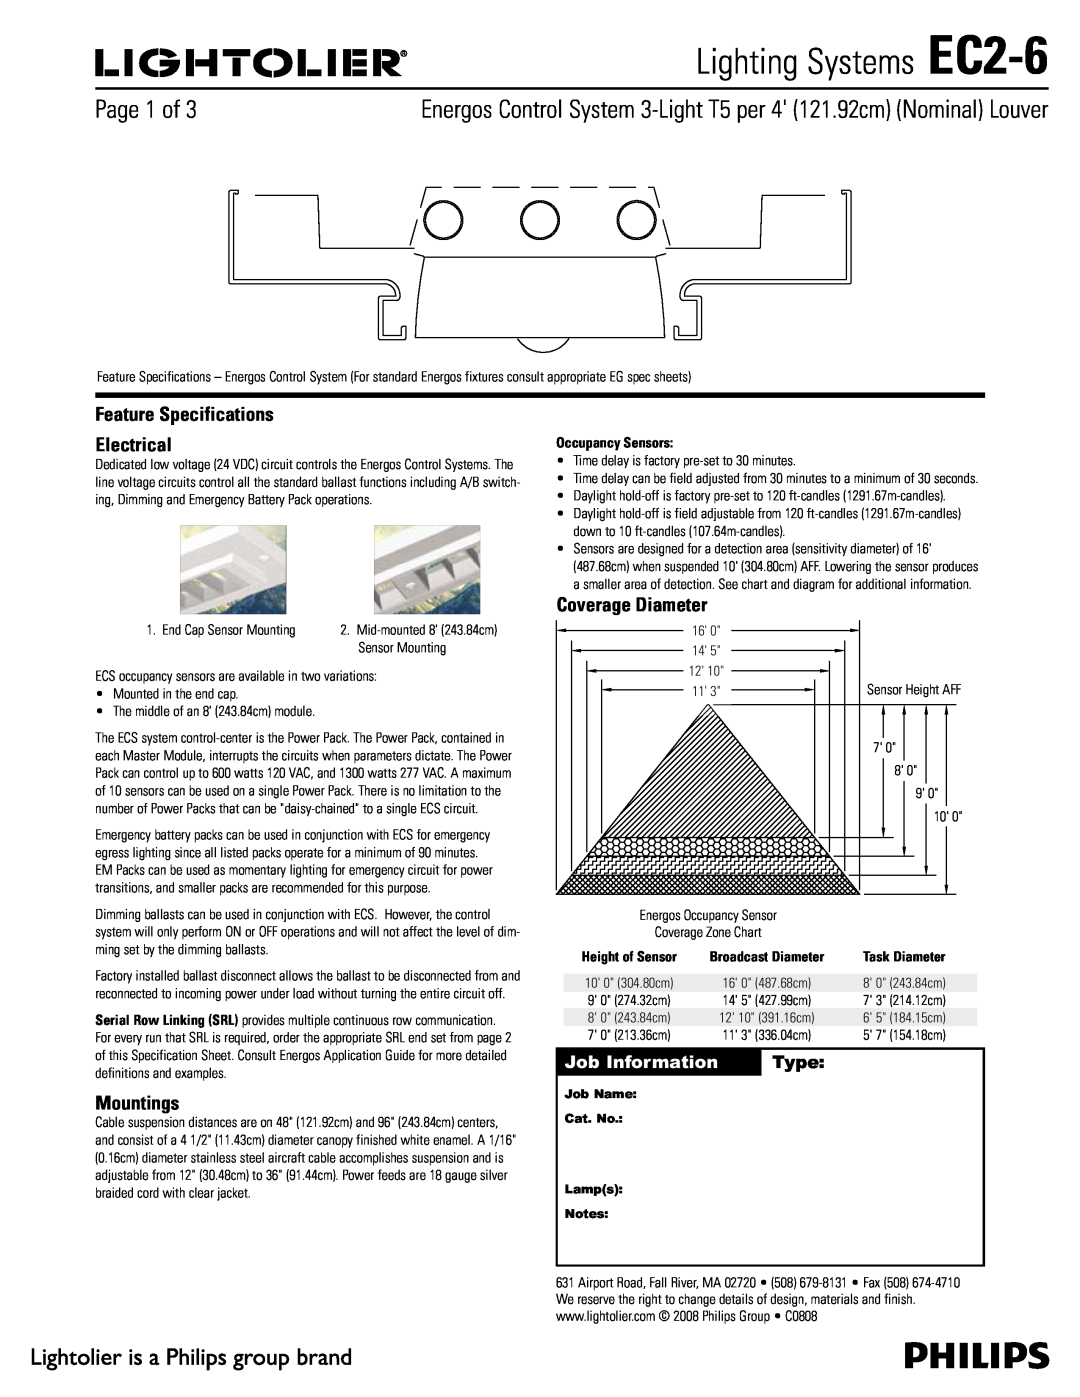 Lightolier specifications Lighting Systems EC2-6, Feature Specifications Electrical, Mountings, Coverage Diameter, Type 